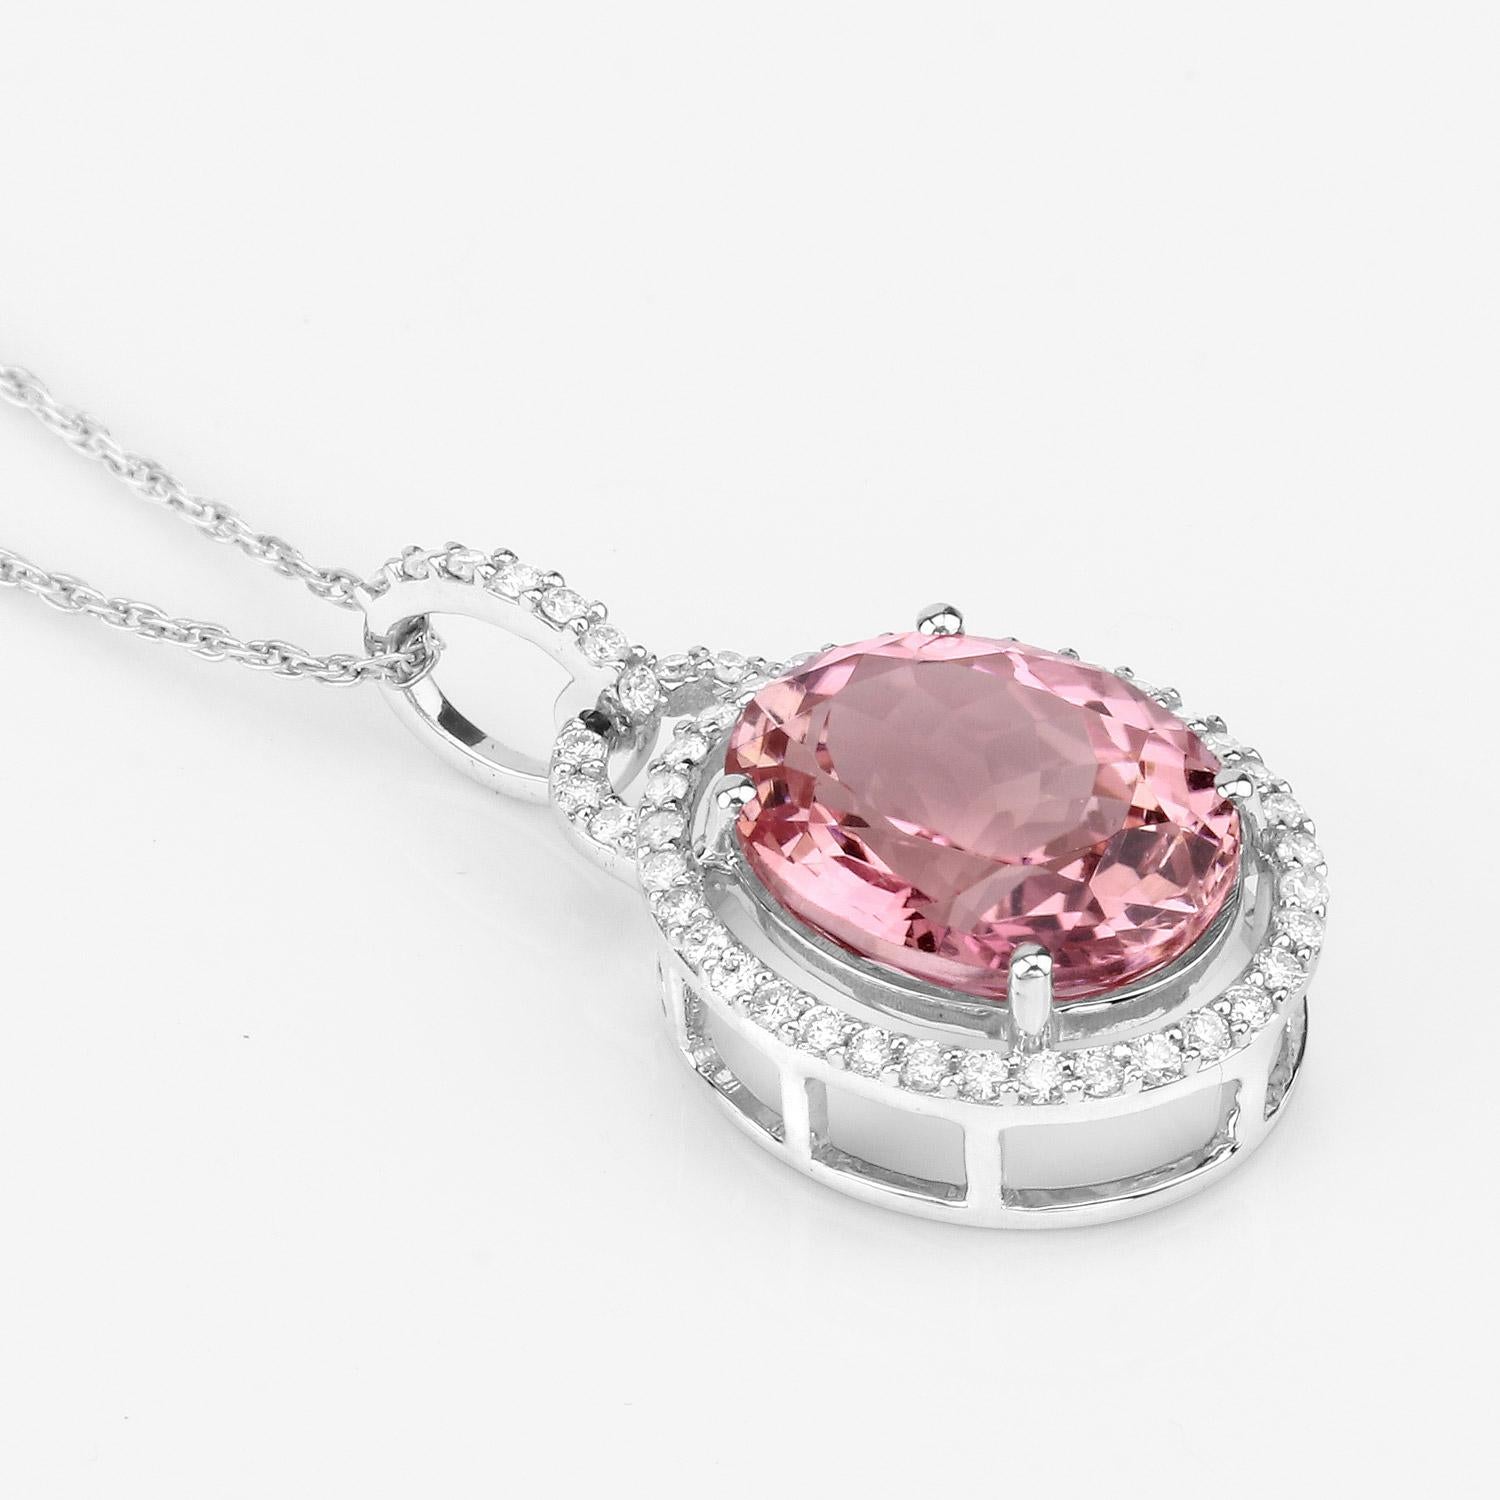 Natural Pink Tourmaline Pendant Diamond Setting 3.90 Carats 14K White Gold In Excellent Condition For Sale In Laguna Niguel, CA